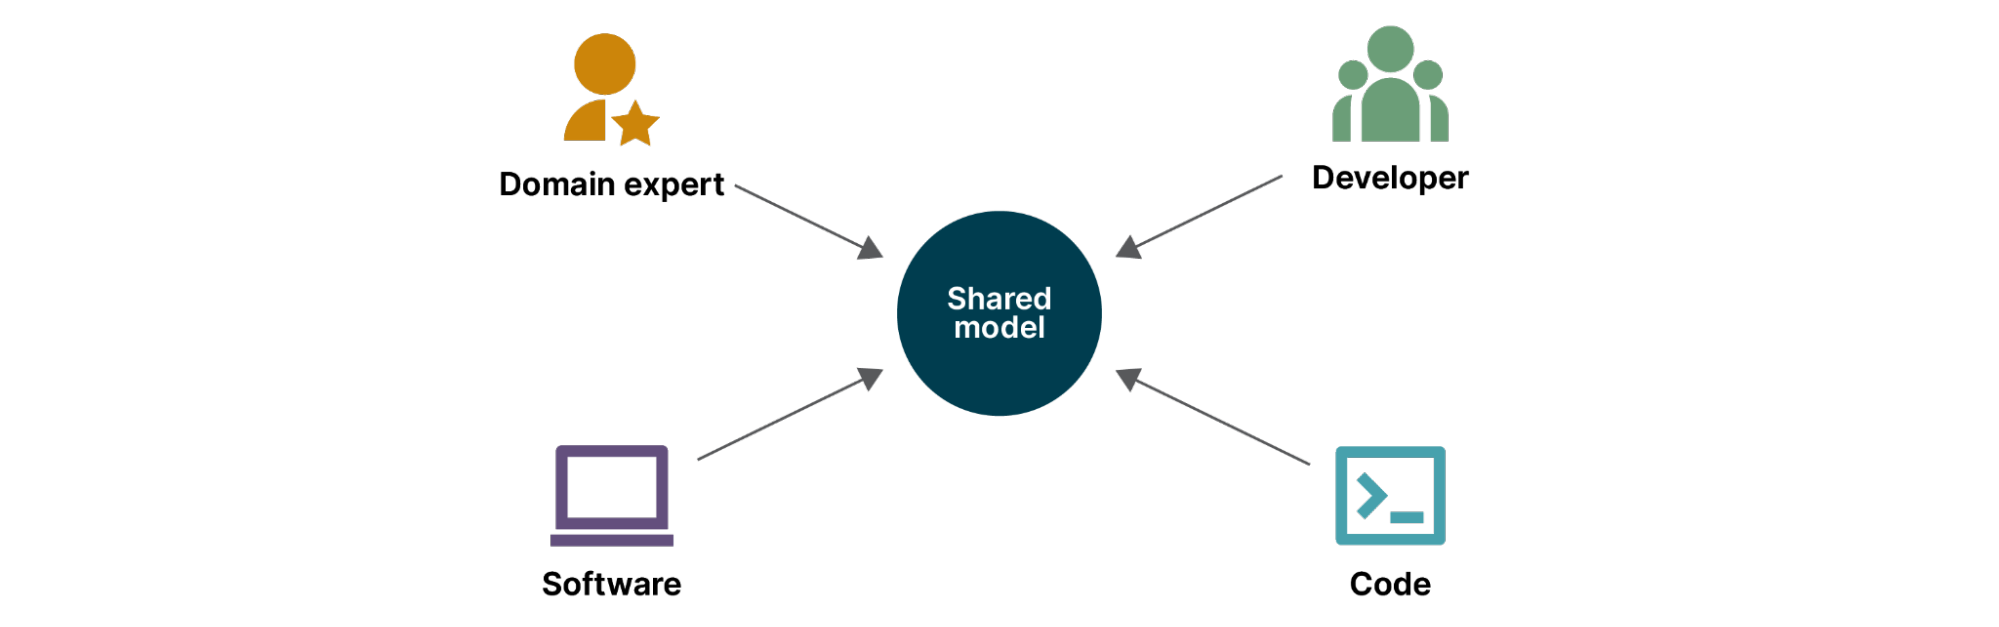 Diagram showing the relationships between domain experts, software, developers, code and the shared model